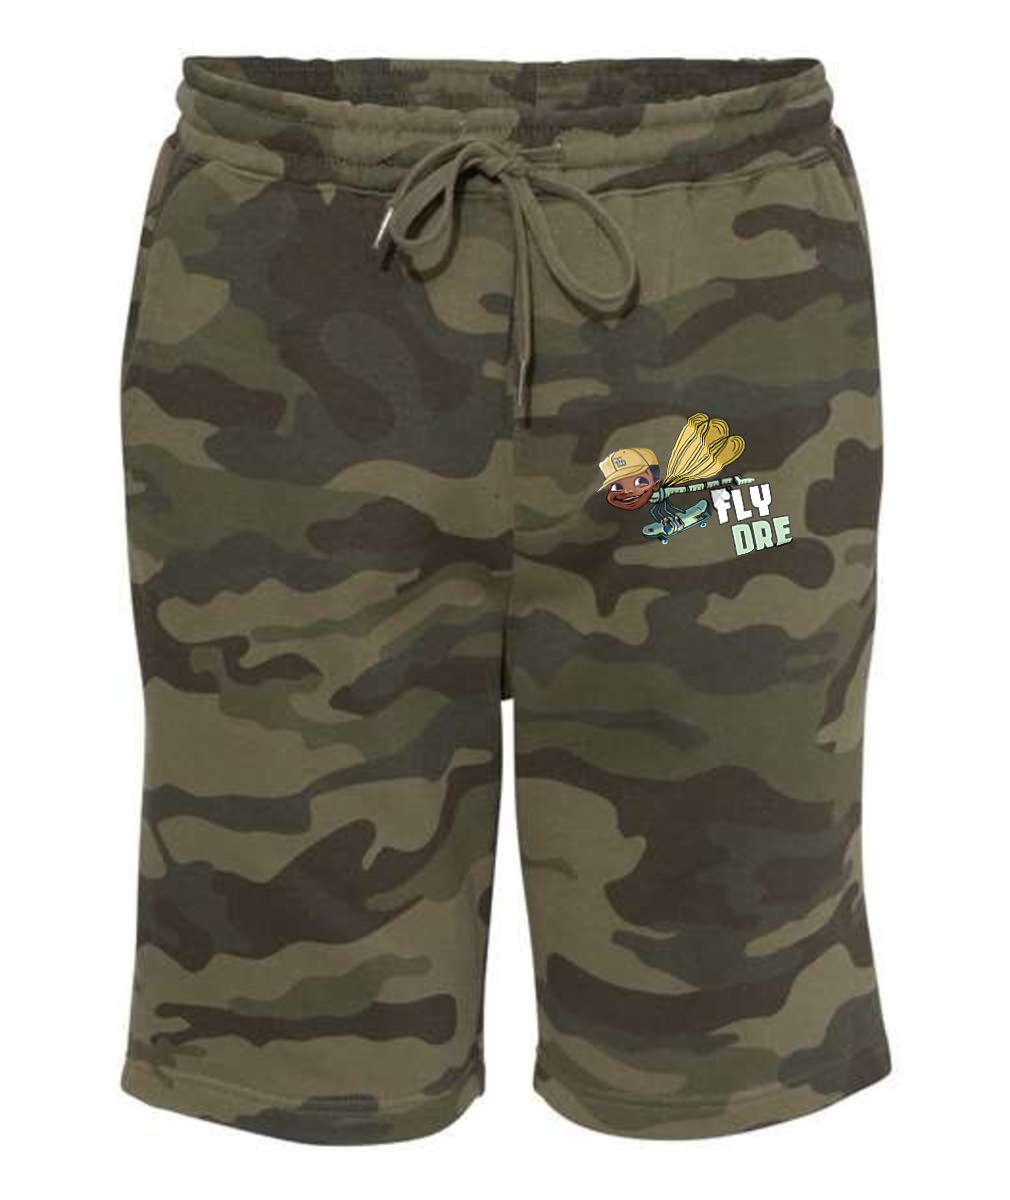 Fly Dre Embroidered Independent Trading Co. - Midweight Fleece Shorts or Similar